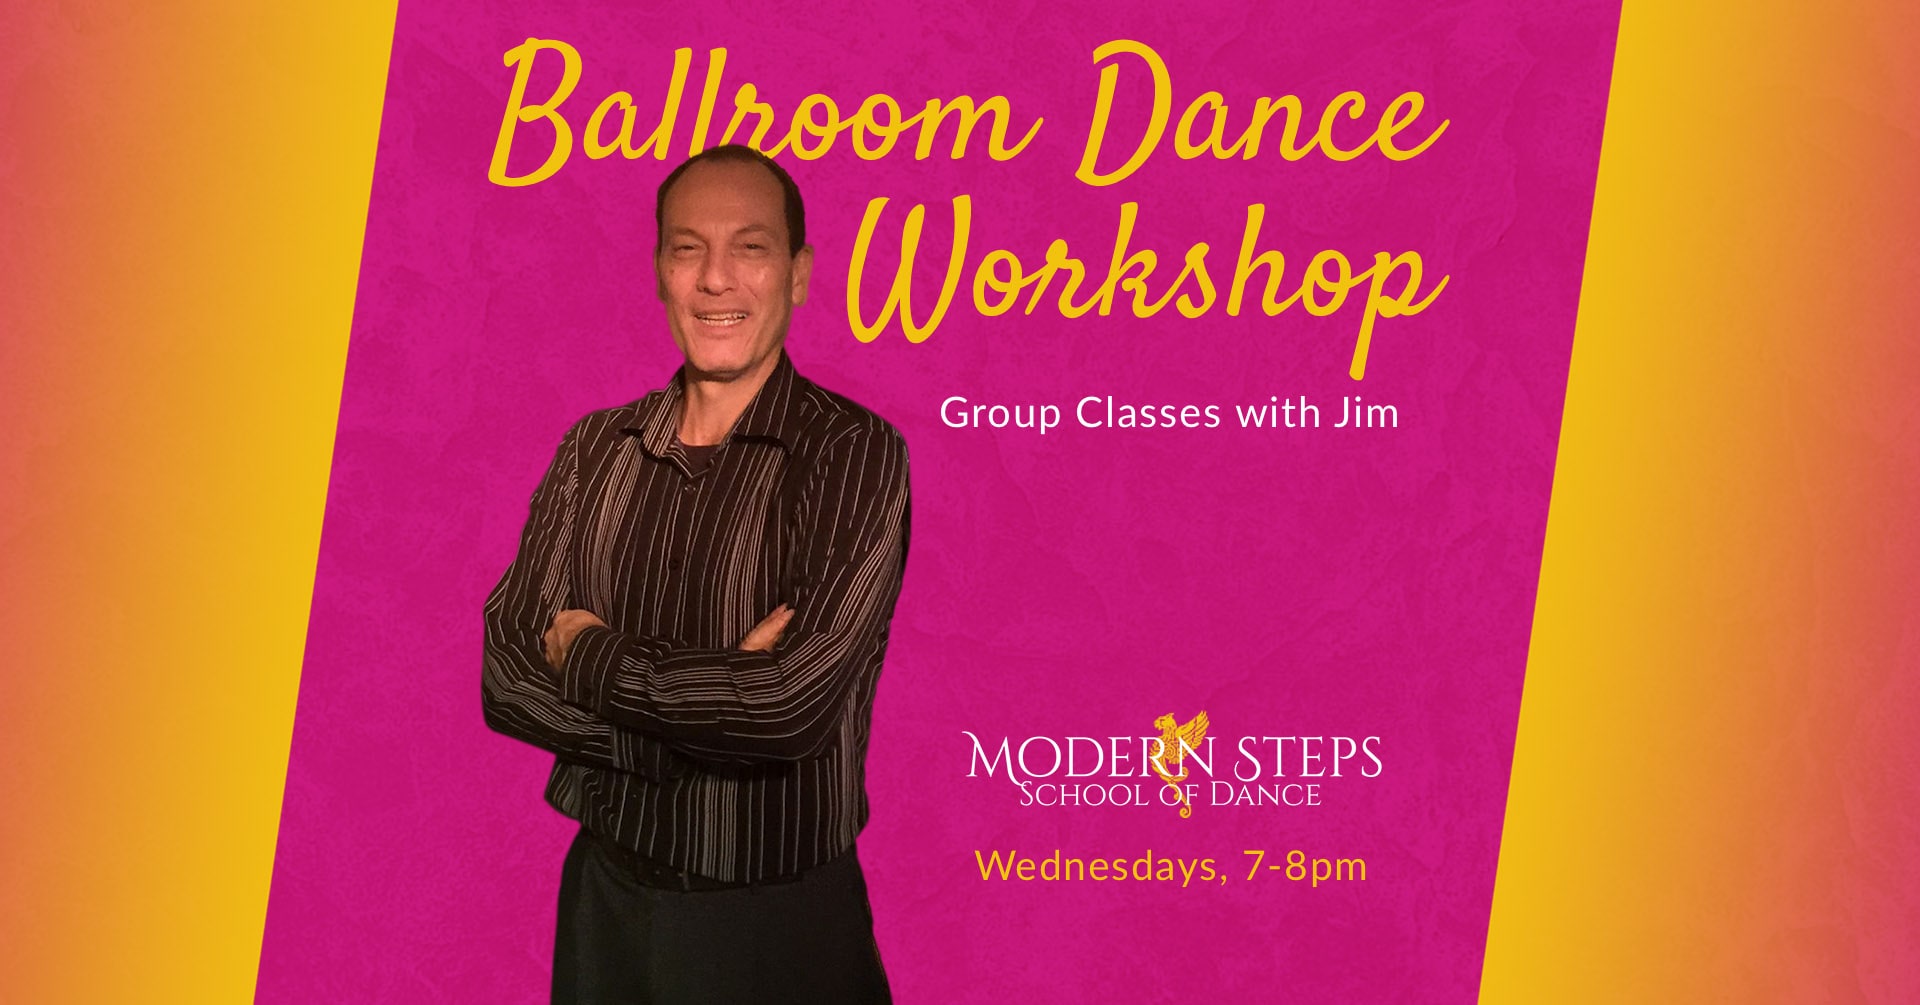 Naples Florida Ballroom Dance Lessons with Jim at Modern Steps School of Dance - Naples Florida Things to Do